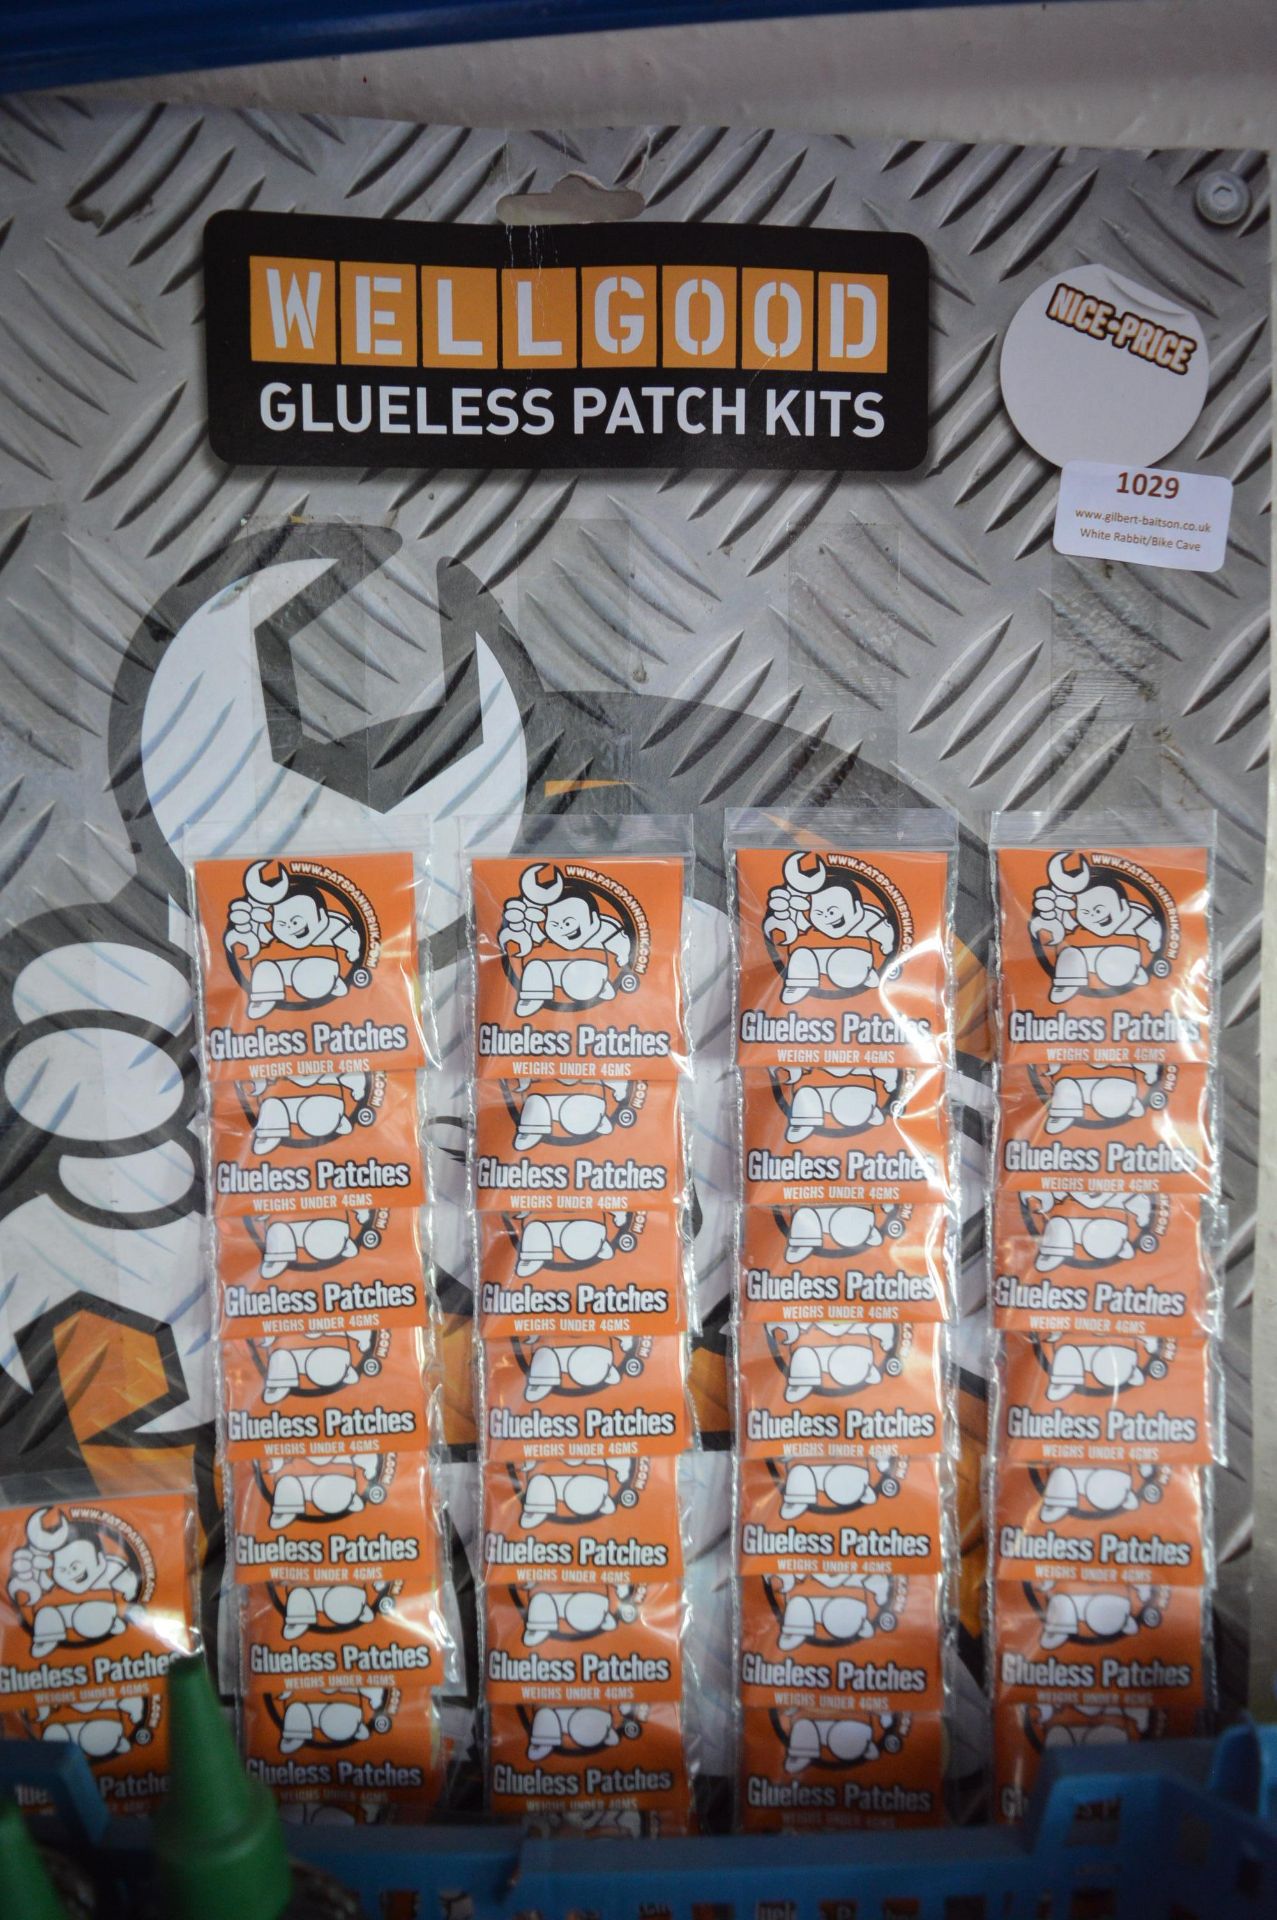 *Well Good Glueless Patch Kits